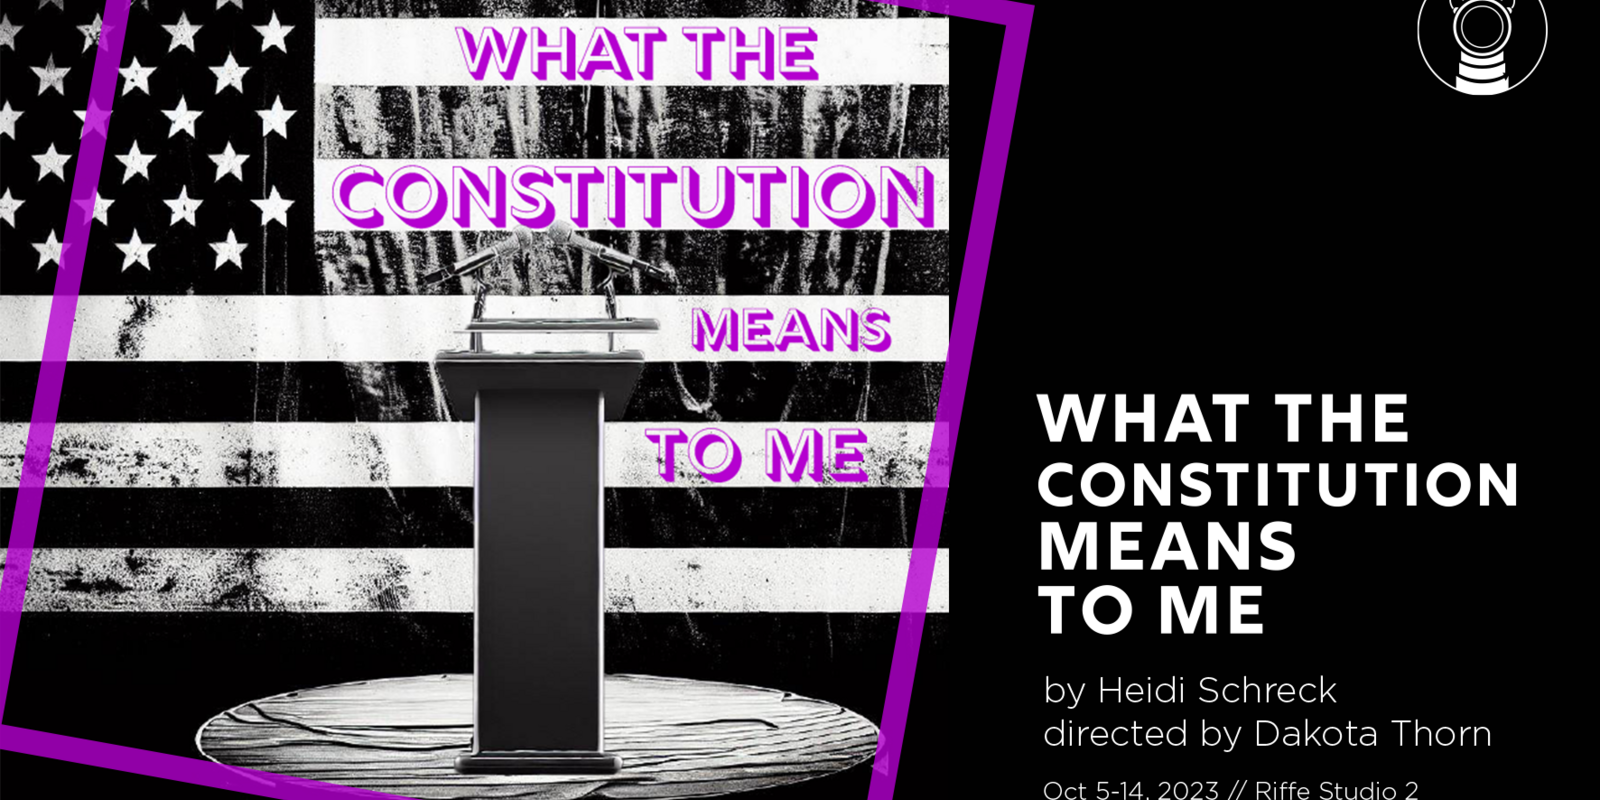 Available Light presents "What The Constitution Means to Me" by Heidi Schreck